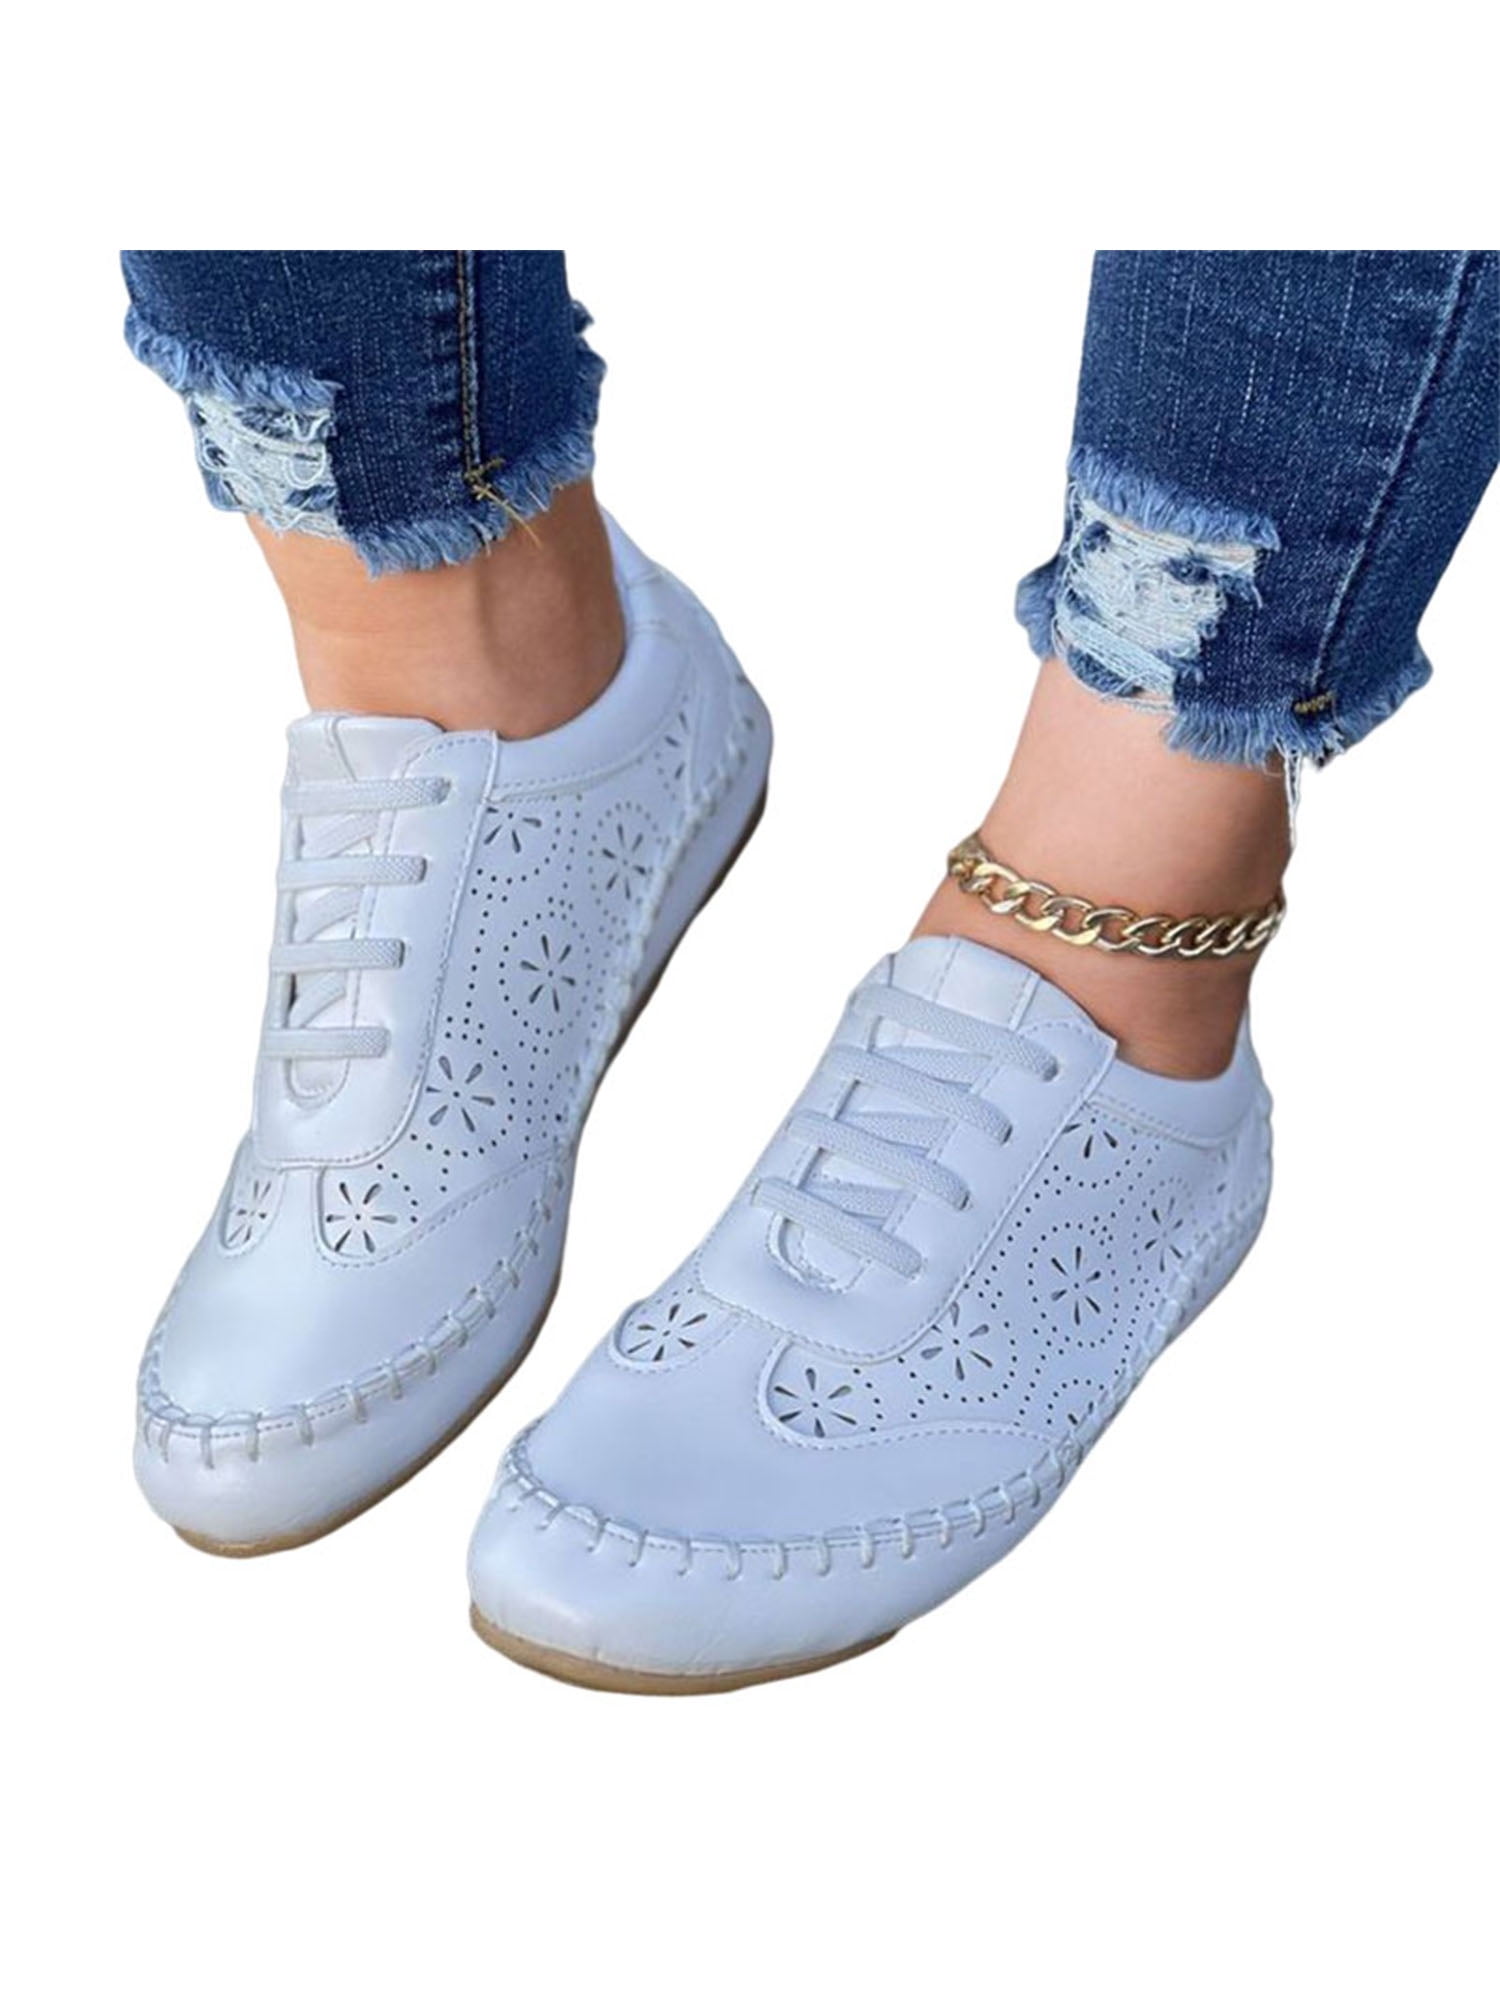 Womens Hollow Summers Wedge Platform Sneakers Creepers Lace Up Shoes Breathable 